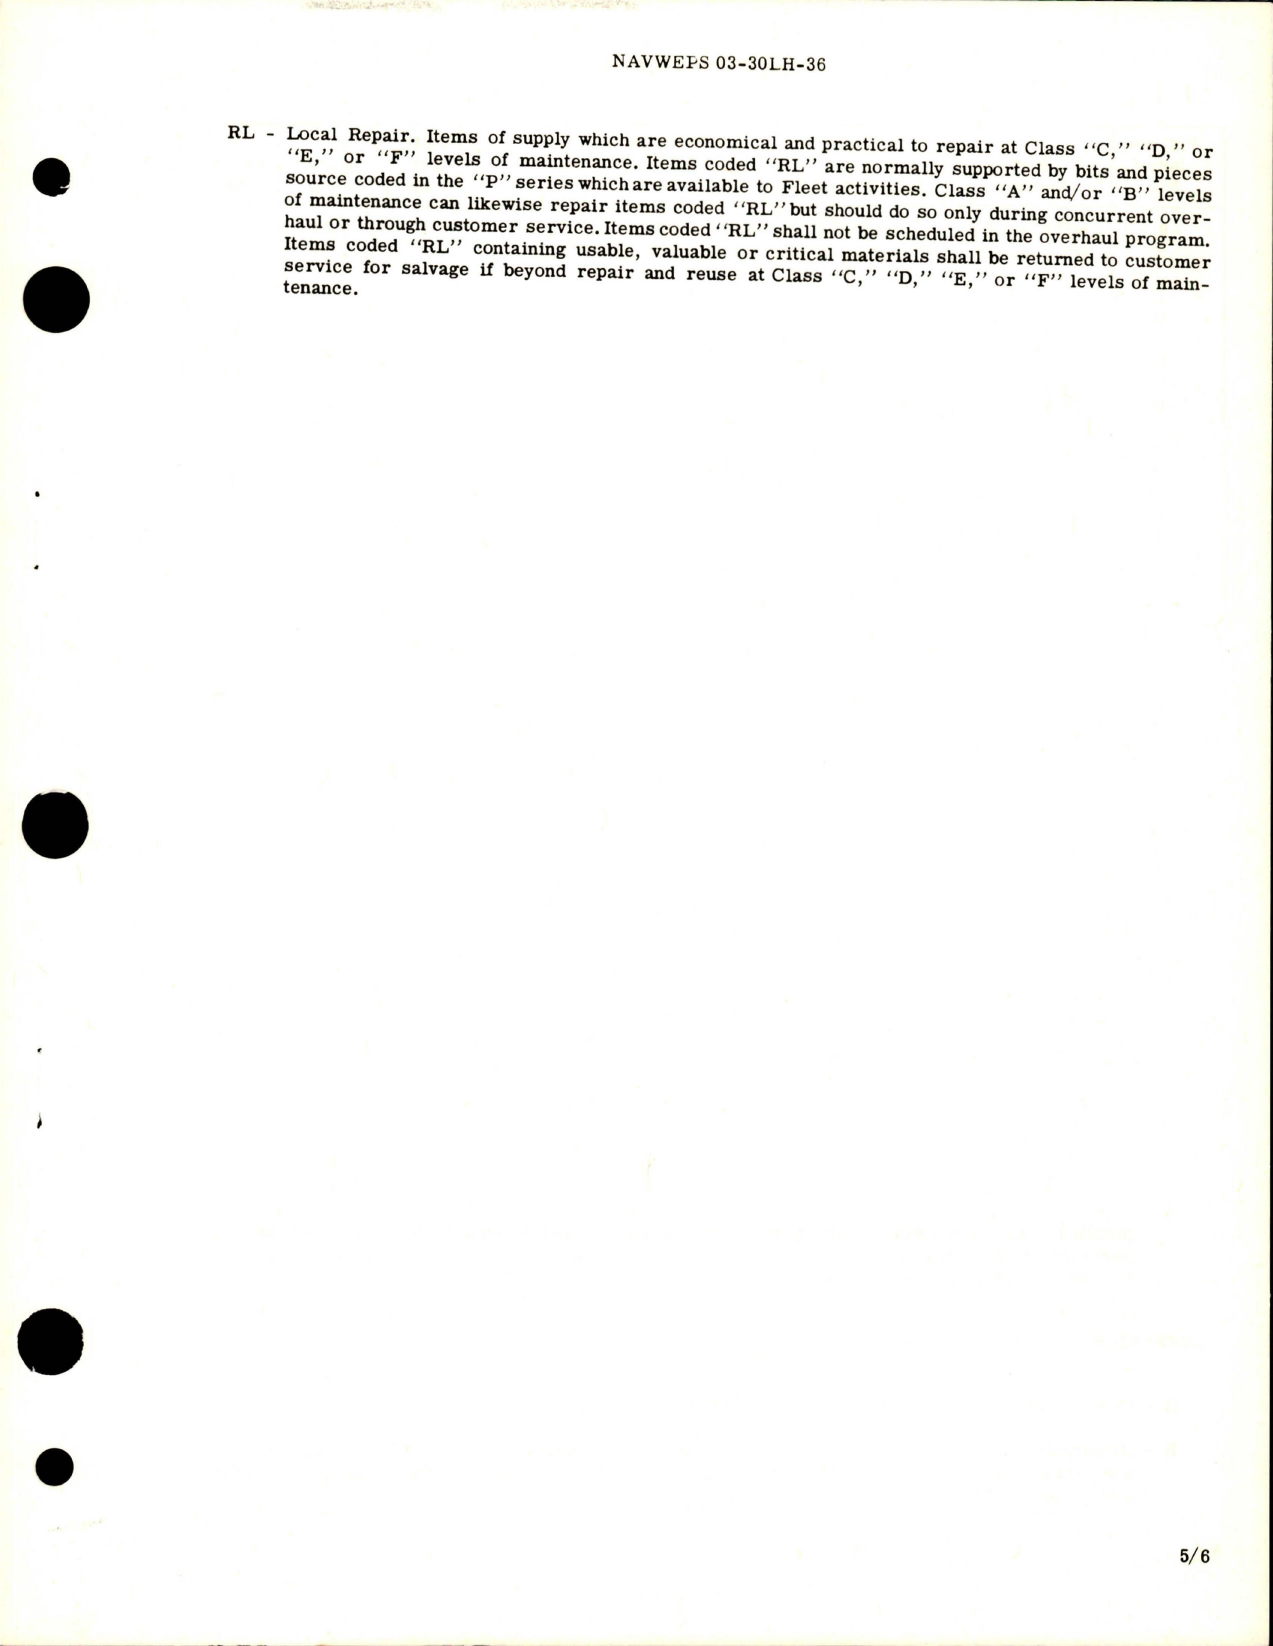 Sample page 5 from AirCorps Library document: Overhaul Instructions with Parts Breakdown for Ramp Uplock Cylinder Assembly - Part 695037 